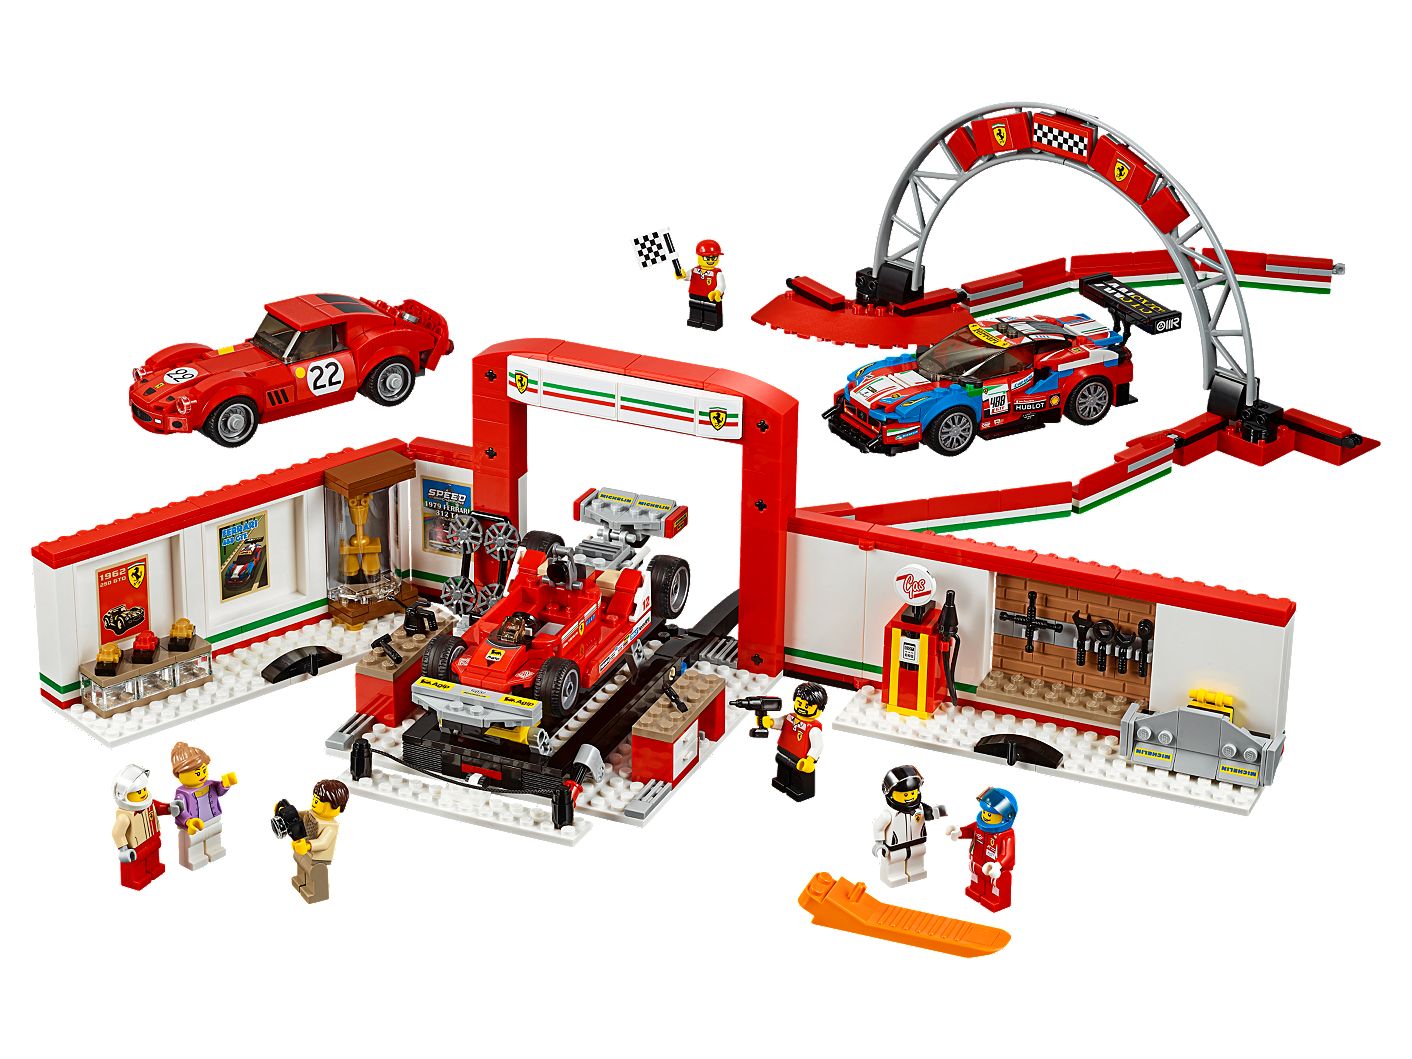 Ferrari Ultimate Garage 75889 Speed Champions Buy Online At The Official Lego Shop Us